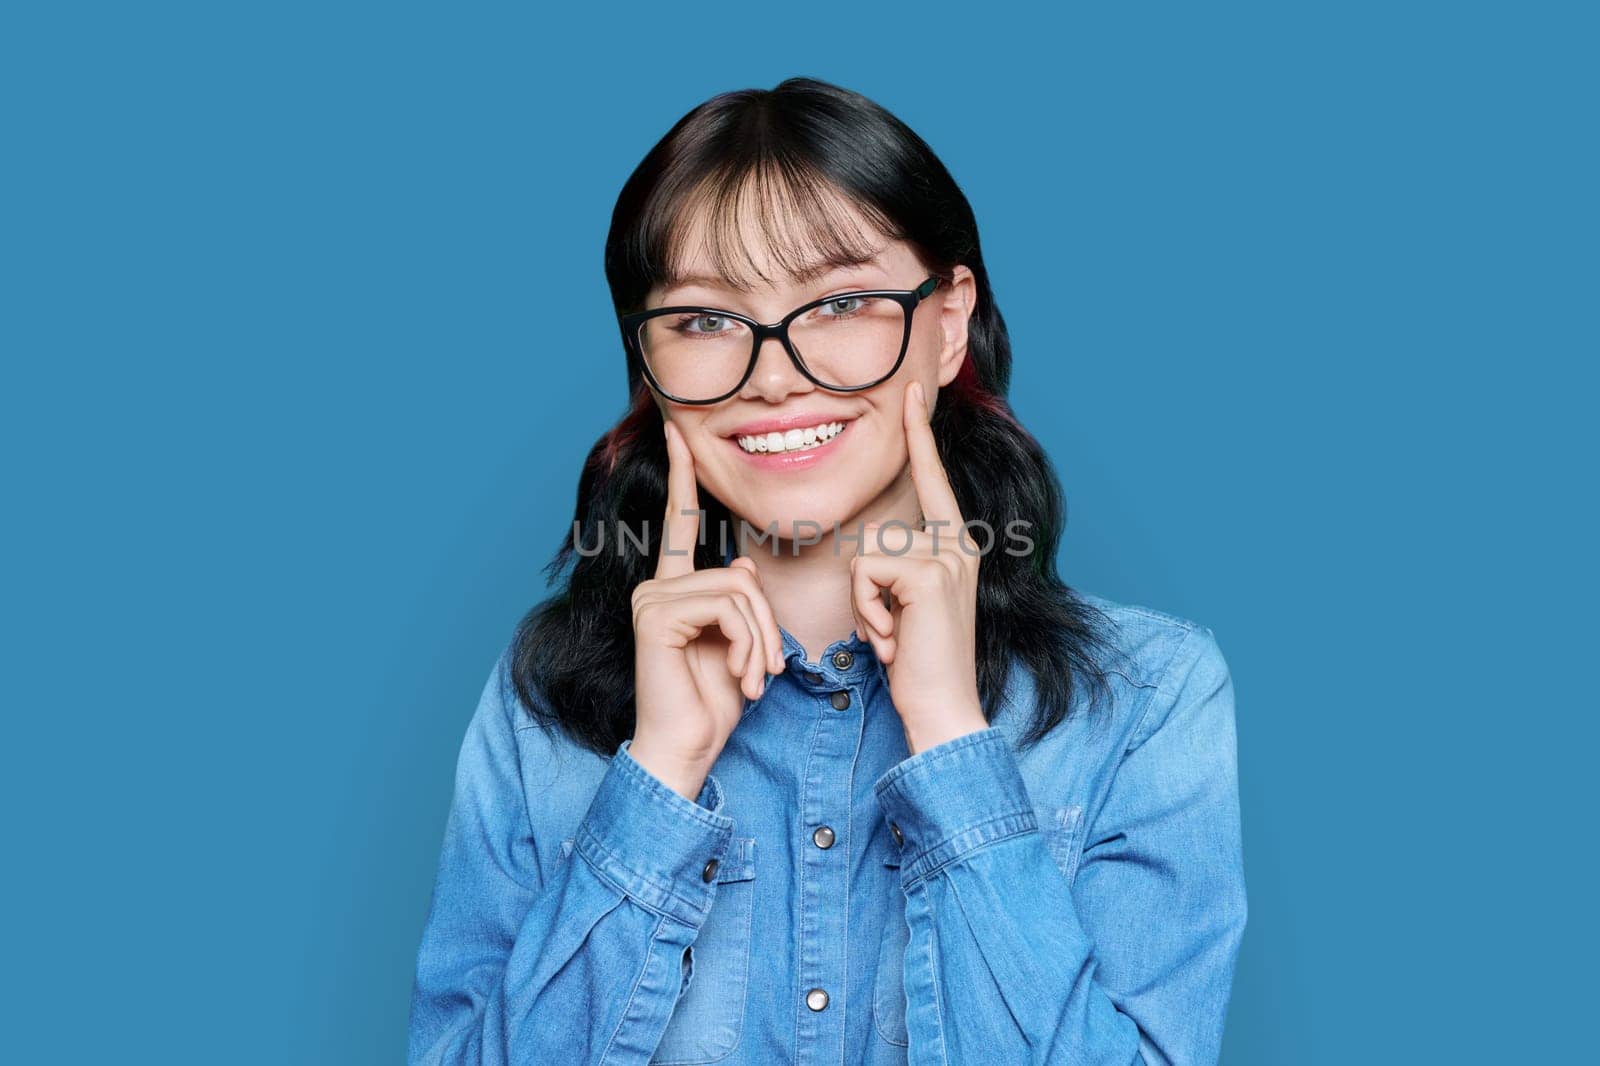 Young woman showing smile with teeth, on white background by VH-studio